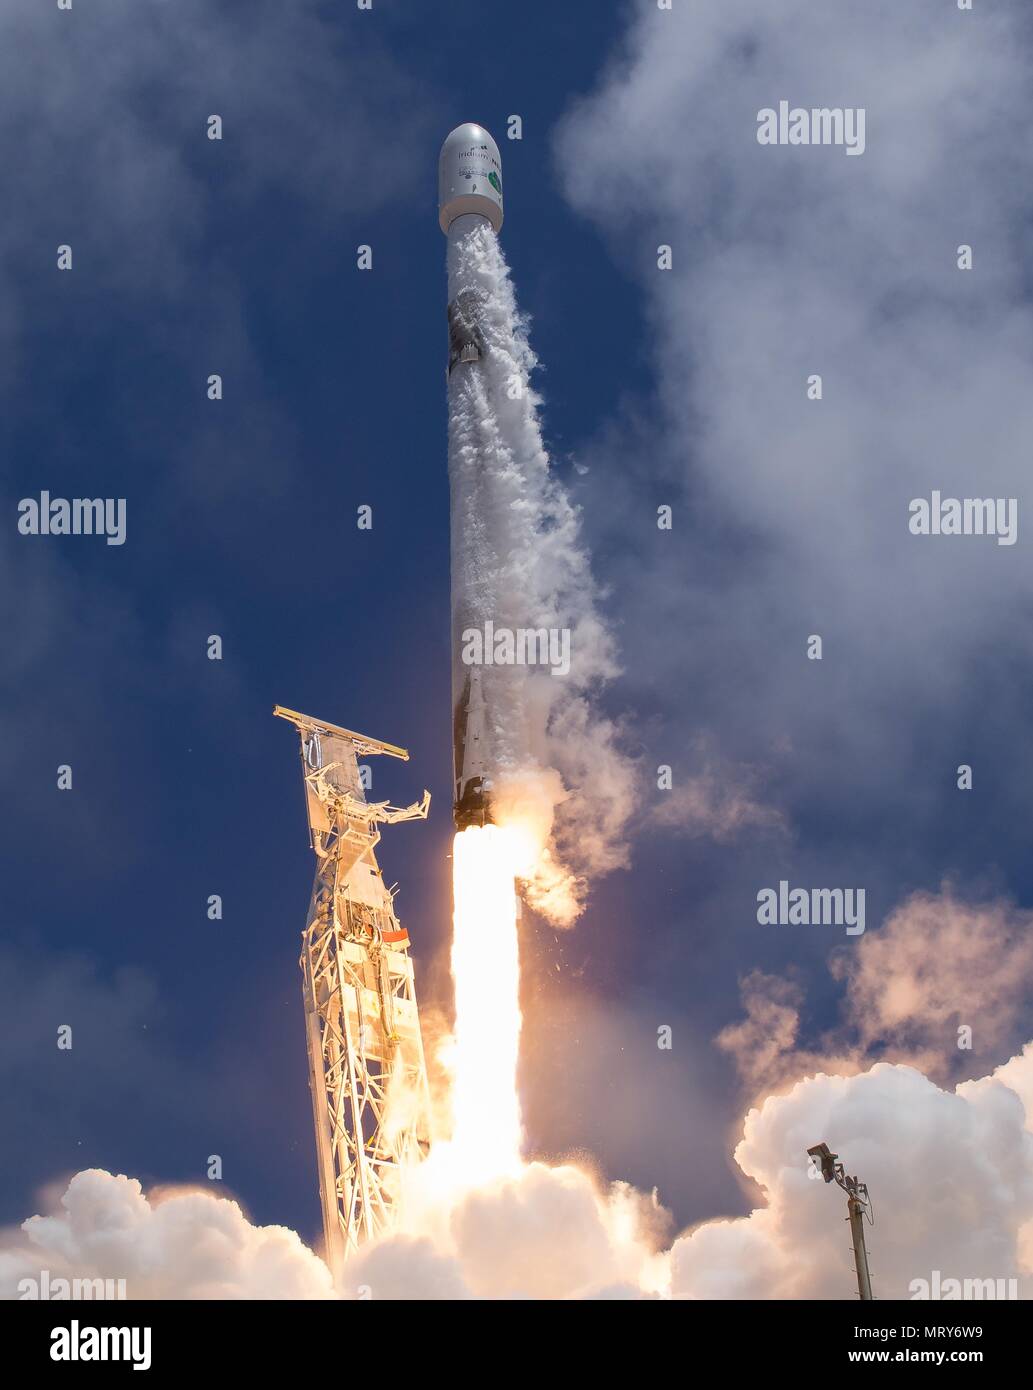 The SpaceX Falcon 9 rocket carrying the NASA German Research Centre for Geosciences GRACE Follow-On spacecraft launches from Space Launch Complex 4E at Vandenberg Air Force Base May 22, 2018 in Vandenberg, California. The GRACE-FO mission is sharing its ride to orbit with five Iridium NEXT communications satellites as part of a commercial ride share agreement. Stock Photo